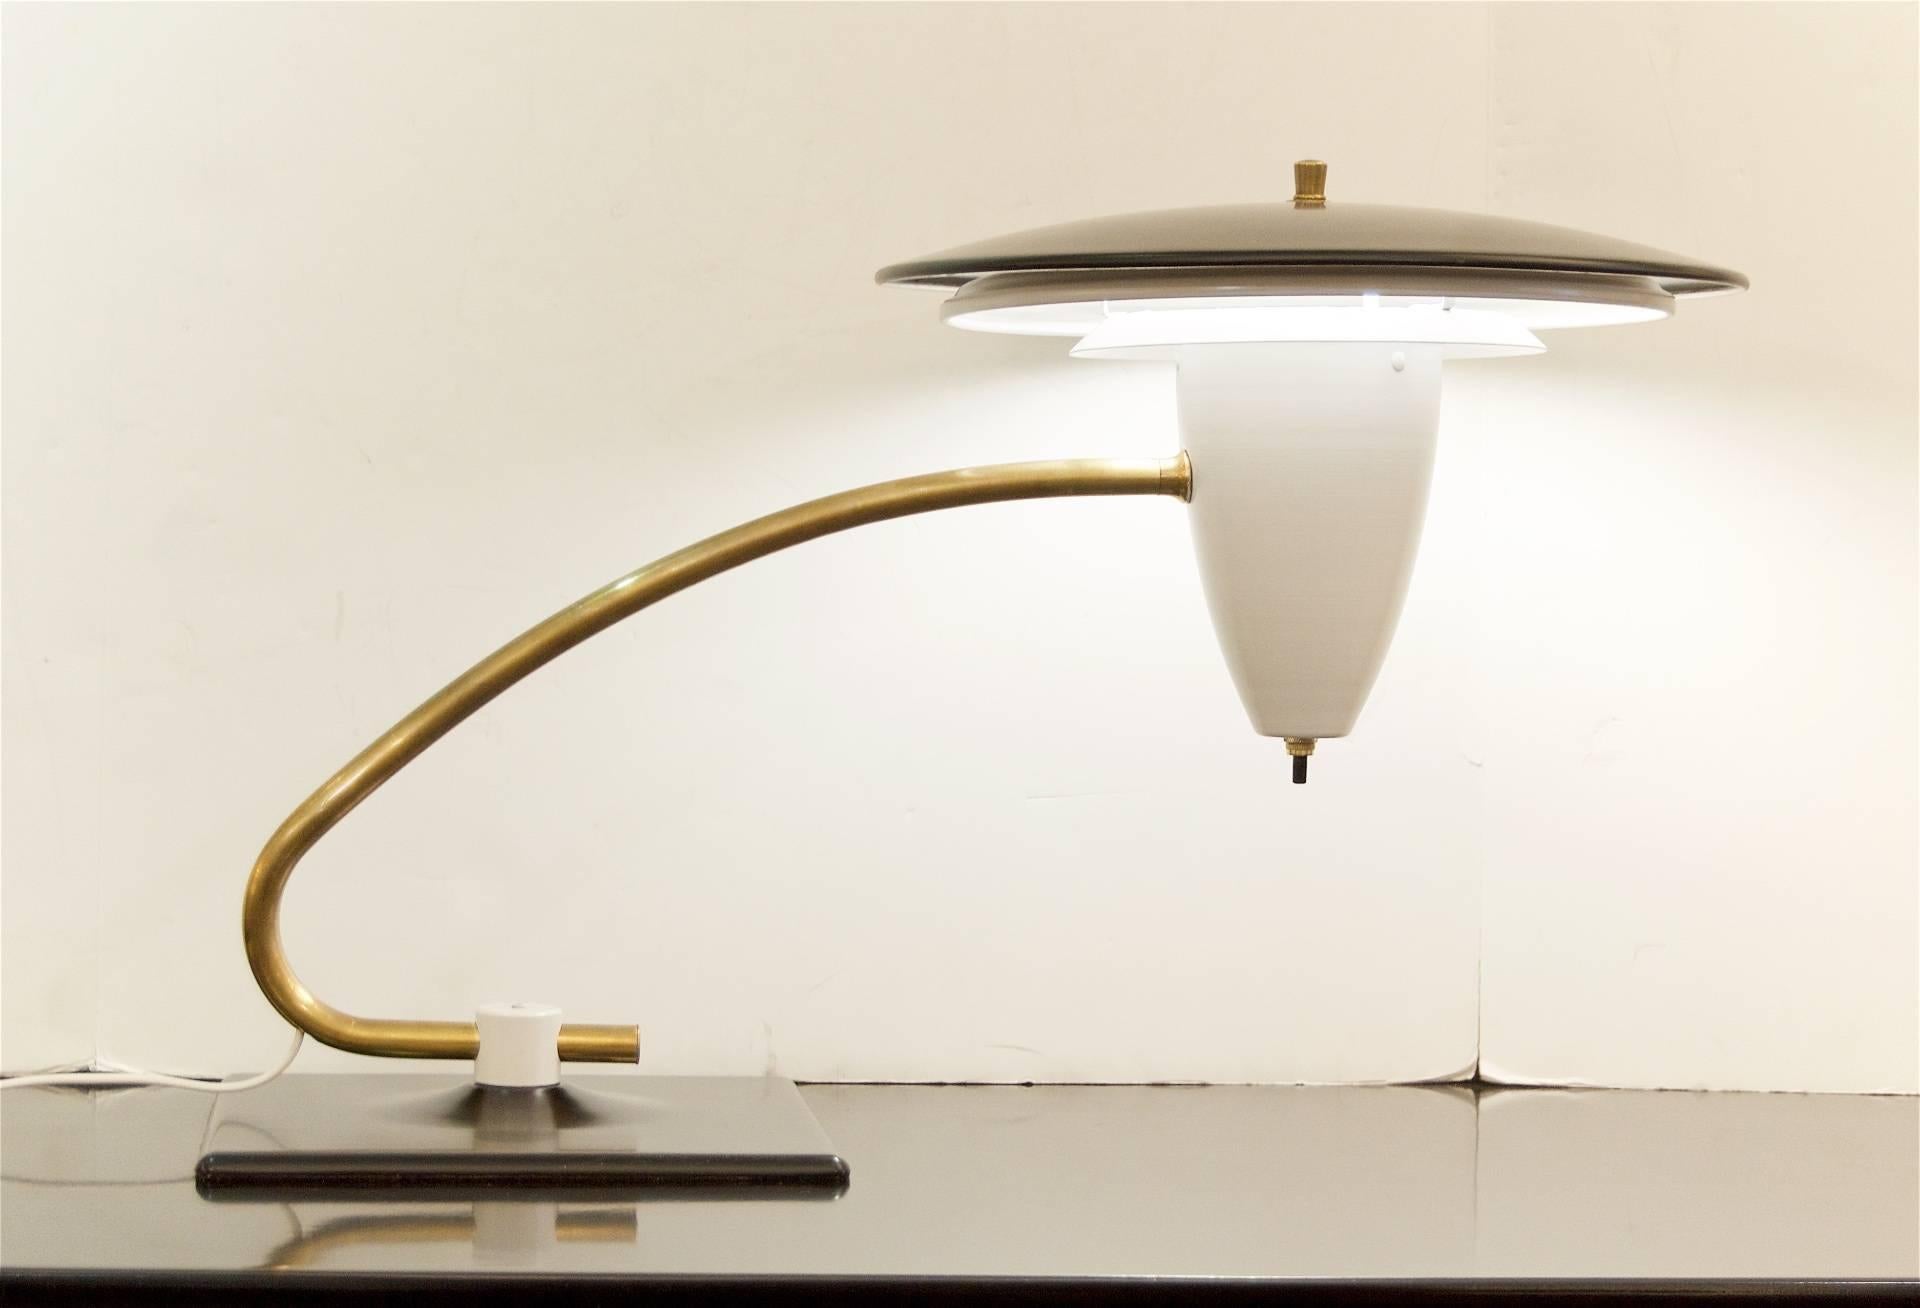 Excellent midcentury desk lamp, with black and white enameled flying disc diffusers on a brass swivel arm.

New wiring and newly lacquered. Original condition to brass.

Measures: 14